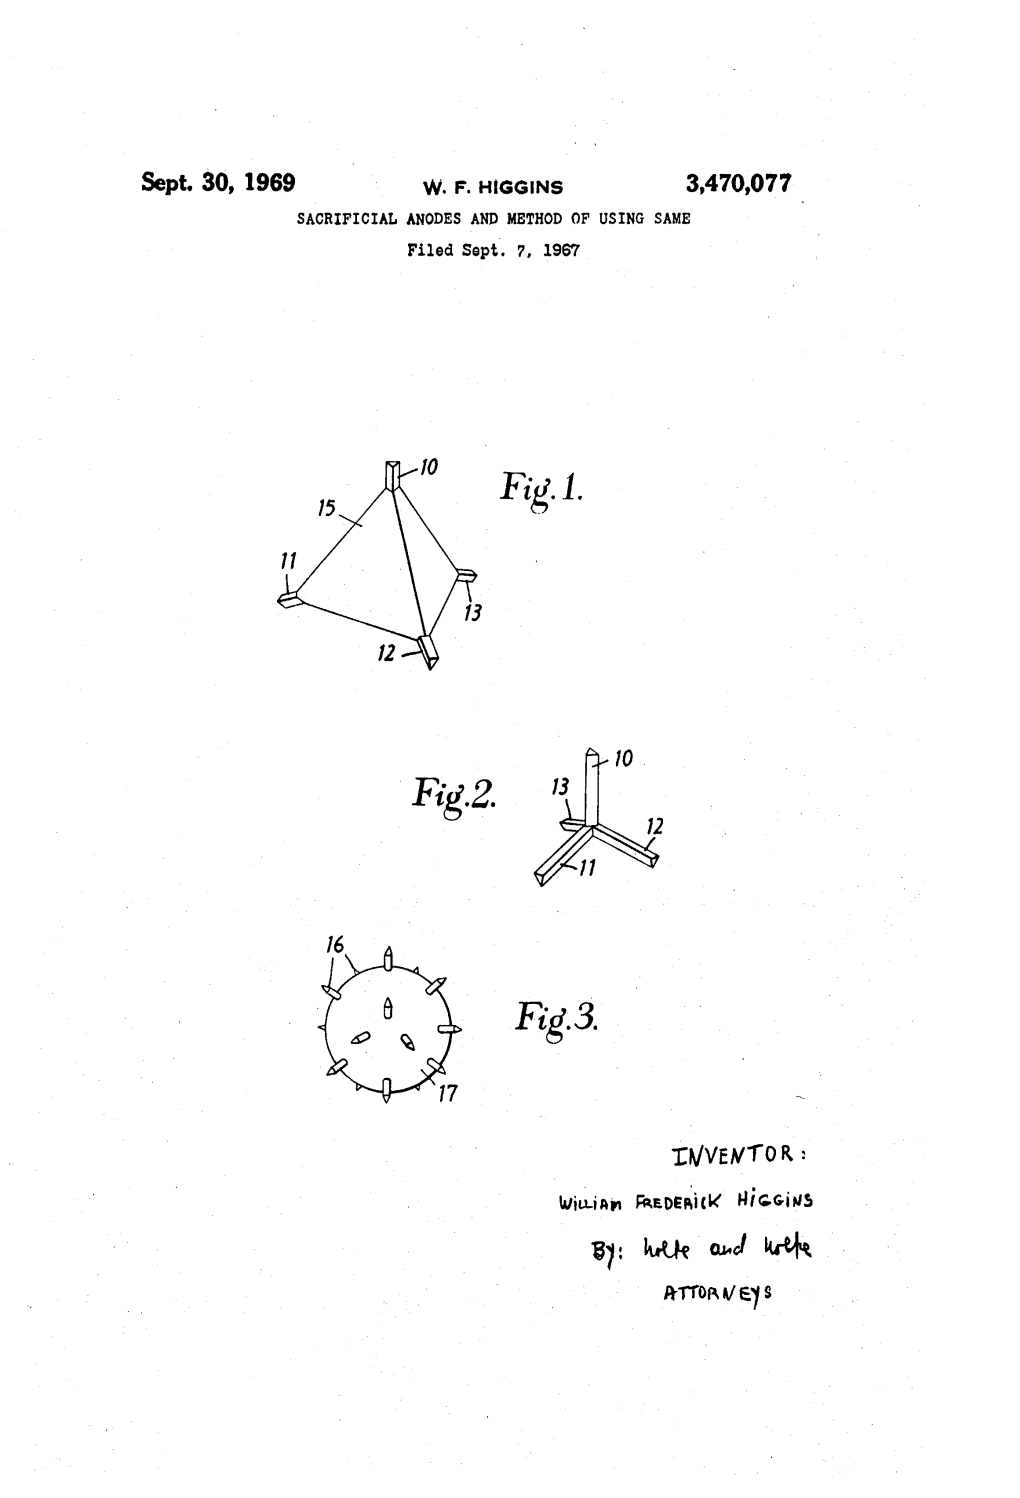 Sept. 30, 1969 W. F. Higgins 3,470.077 SACRIFICIAL ANODES and METHOD of USING SAME Filed Sept